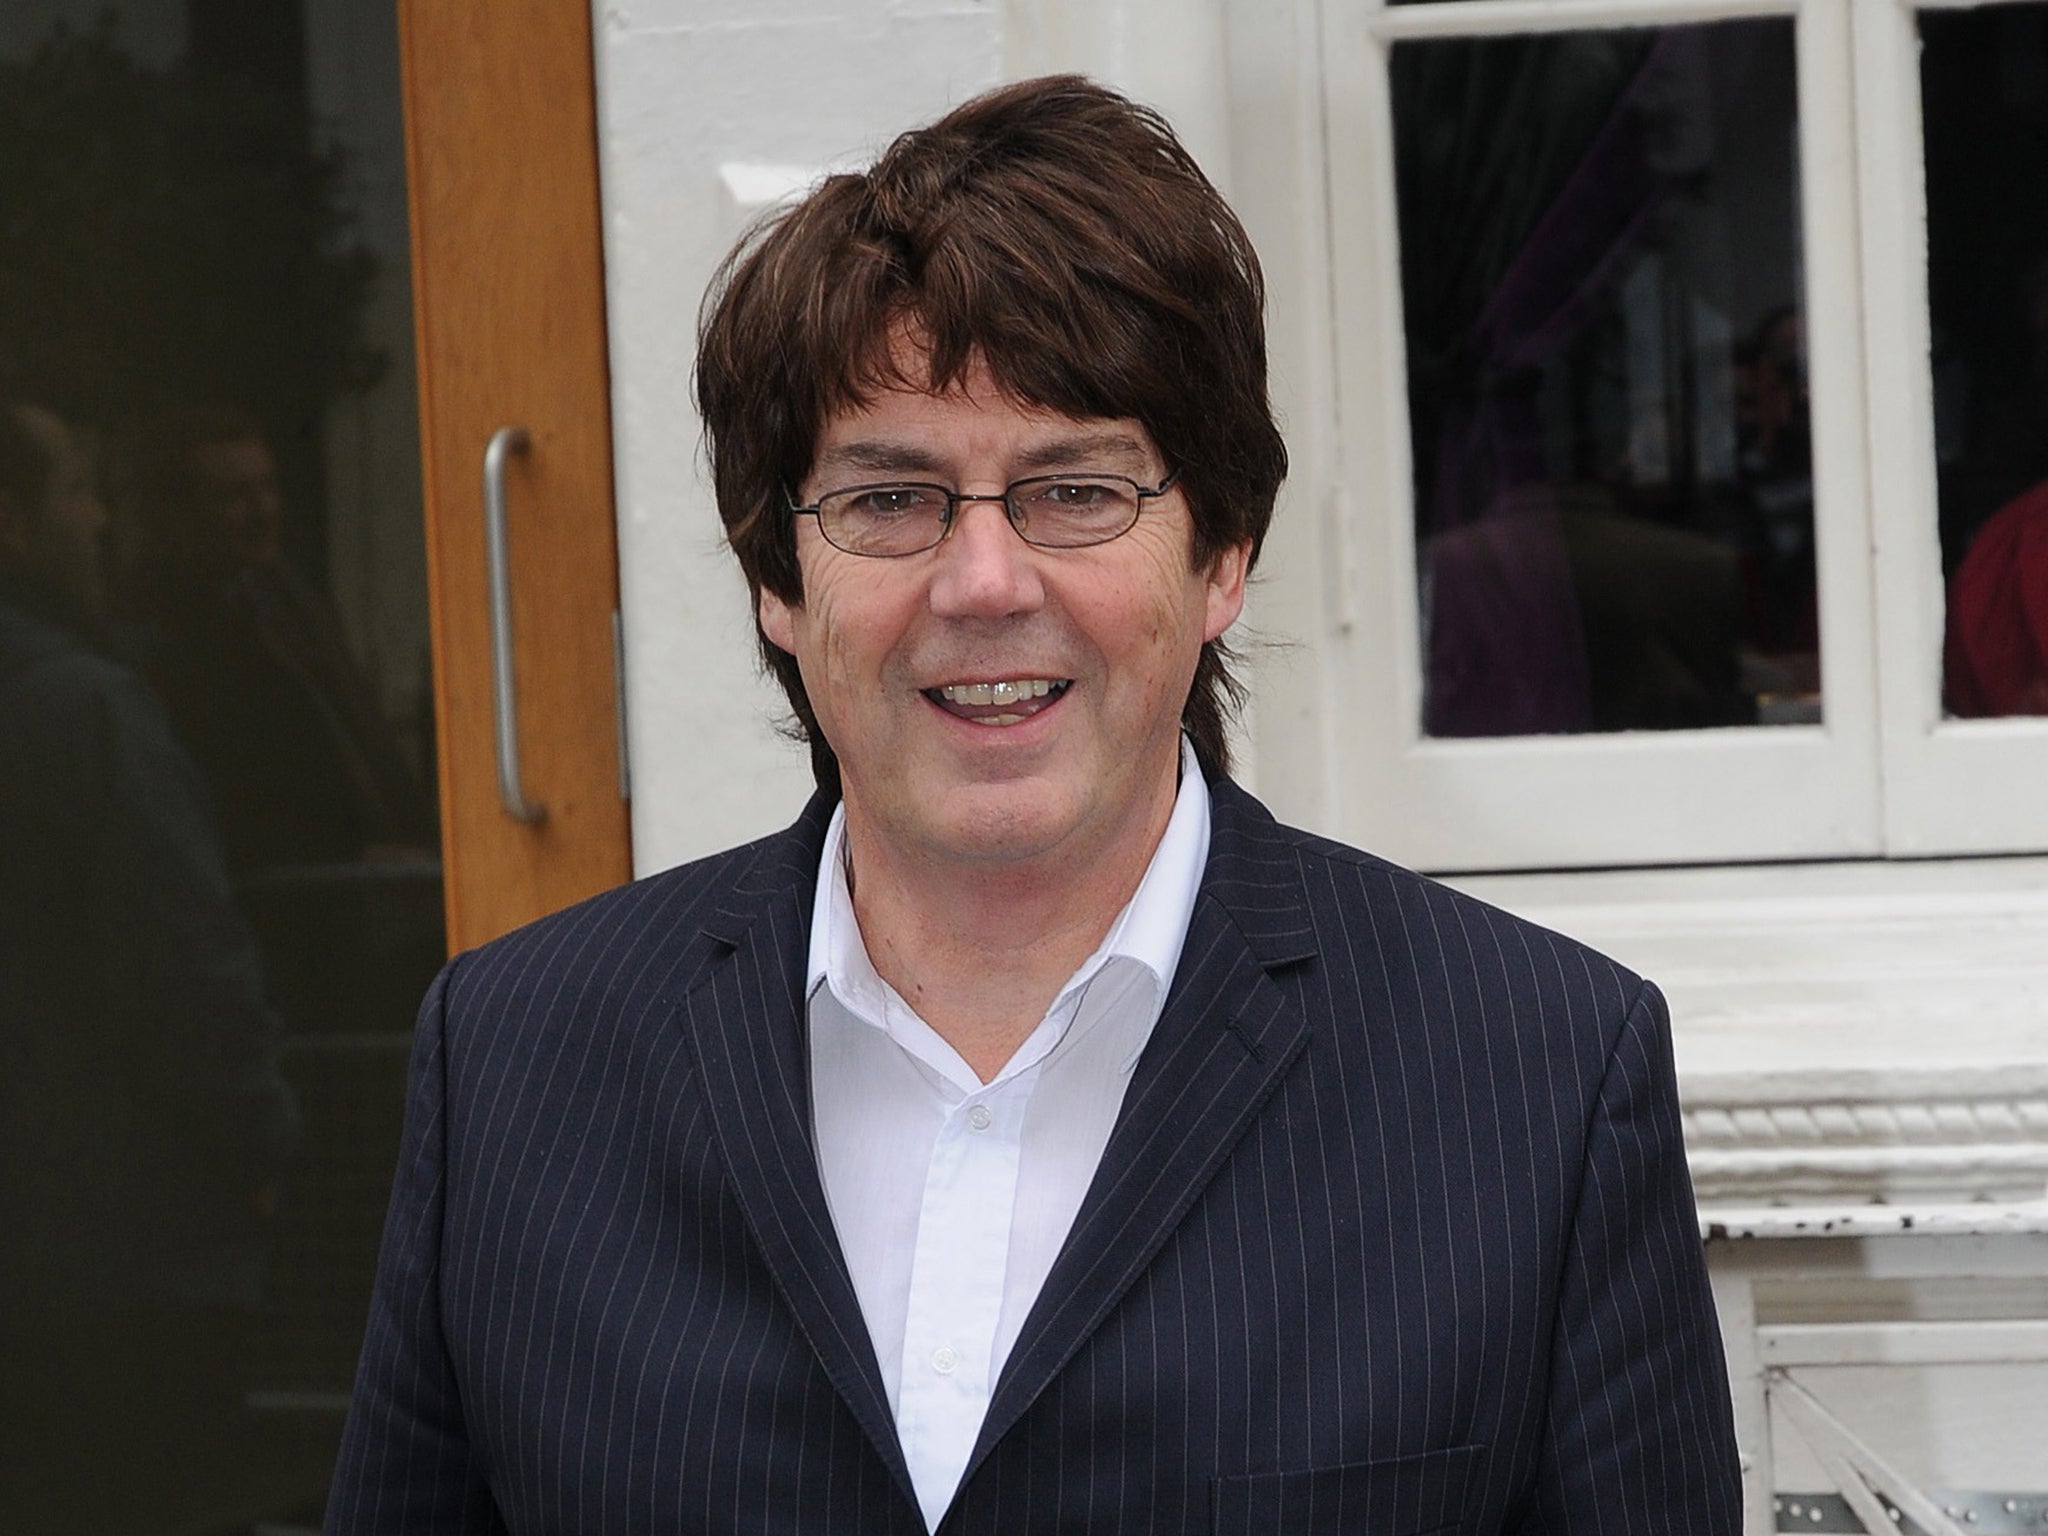 DJ Mike Read is behind the new Ukip song